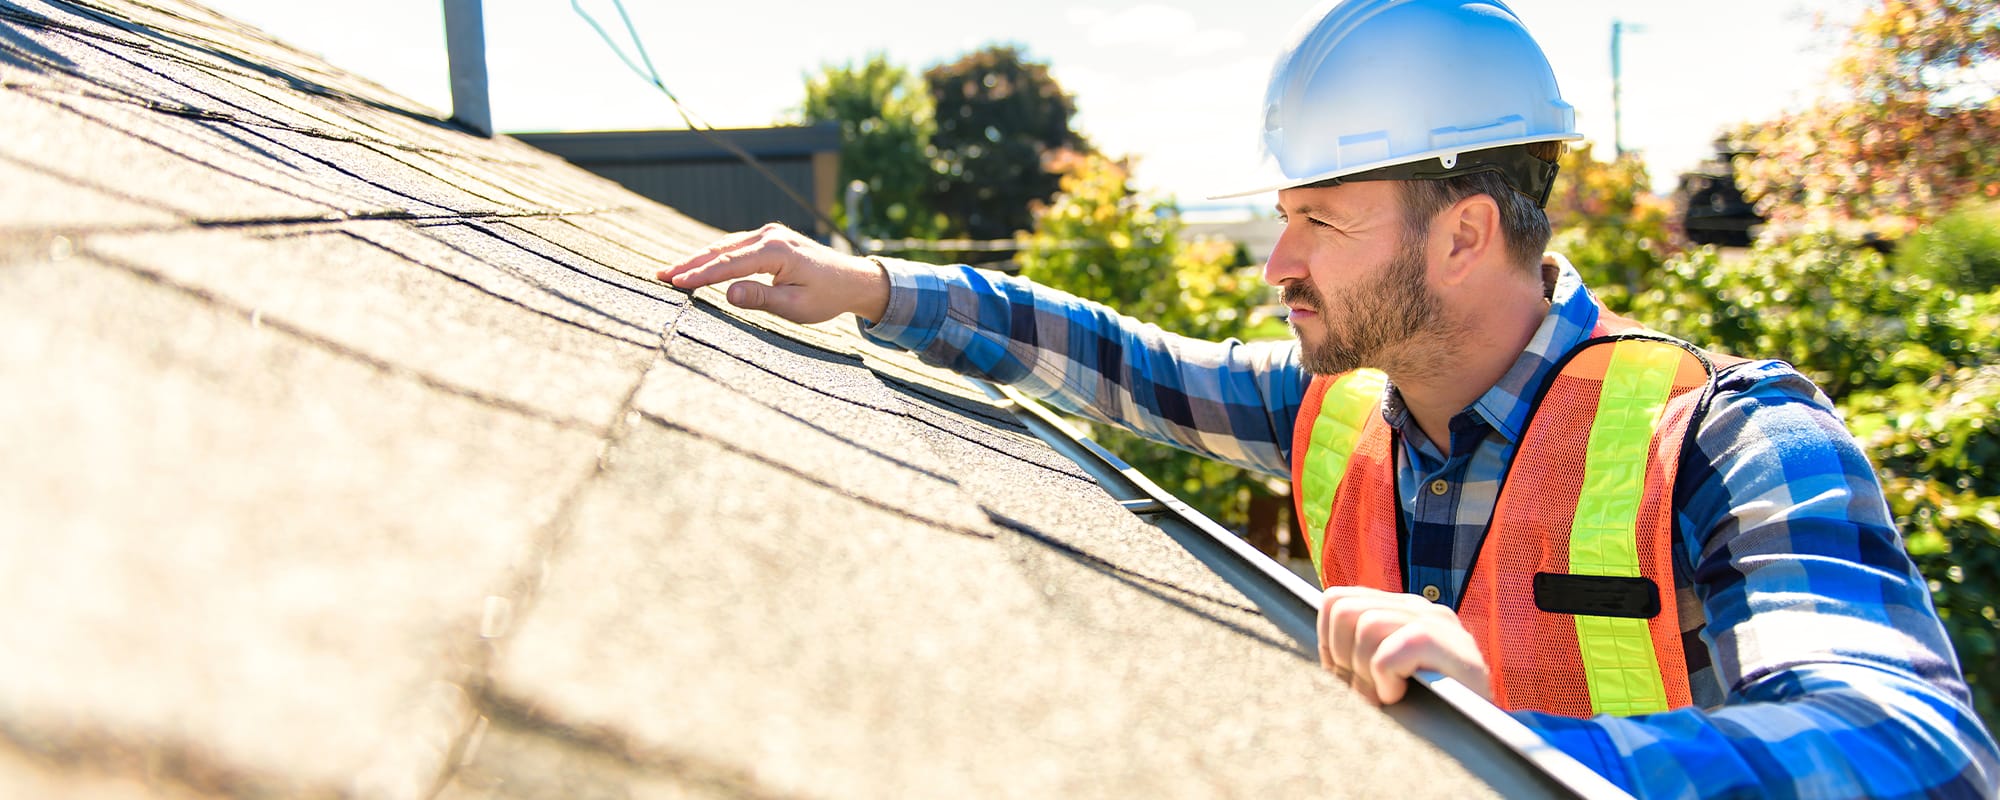 Reasons Why the Roof Inspection Cost Is Worth It When Buying a New Home